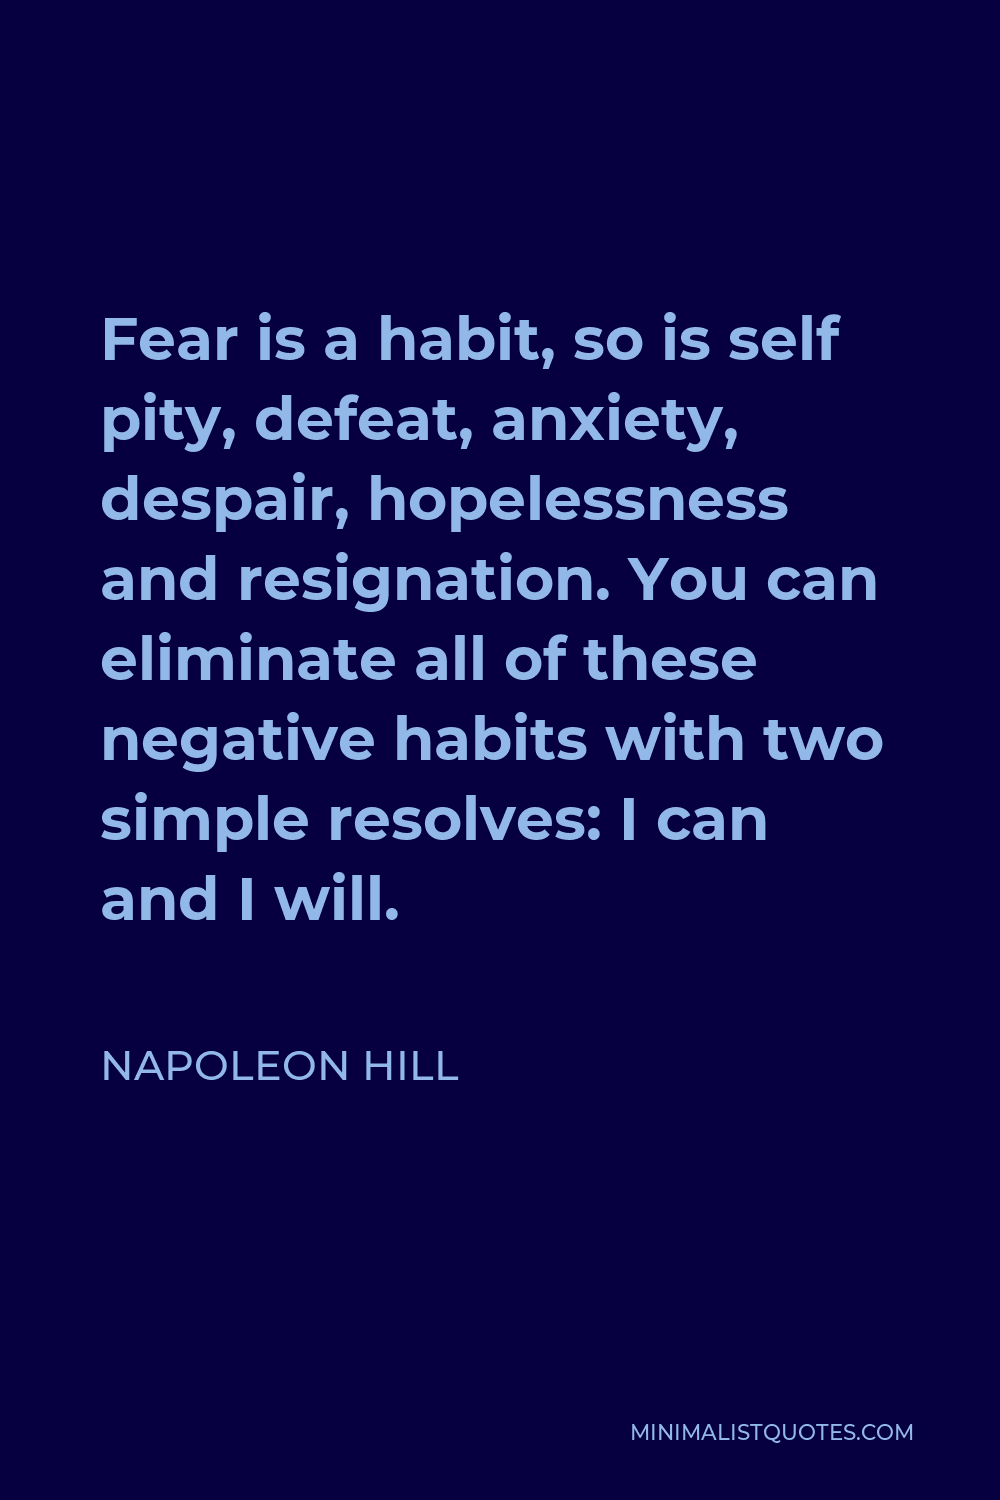 Napoleon Hill Quote - Fear is a habit, so is self pity, defeat, anxiety, despair, hopelessness and resignation. You can eliminate all of these negative habits with two simple resolves: I can and I will.